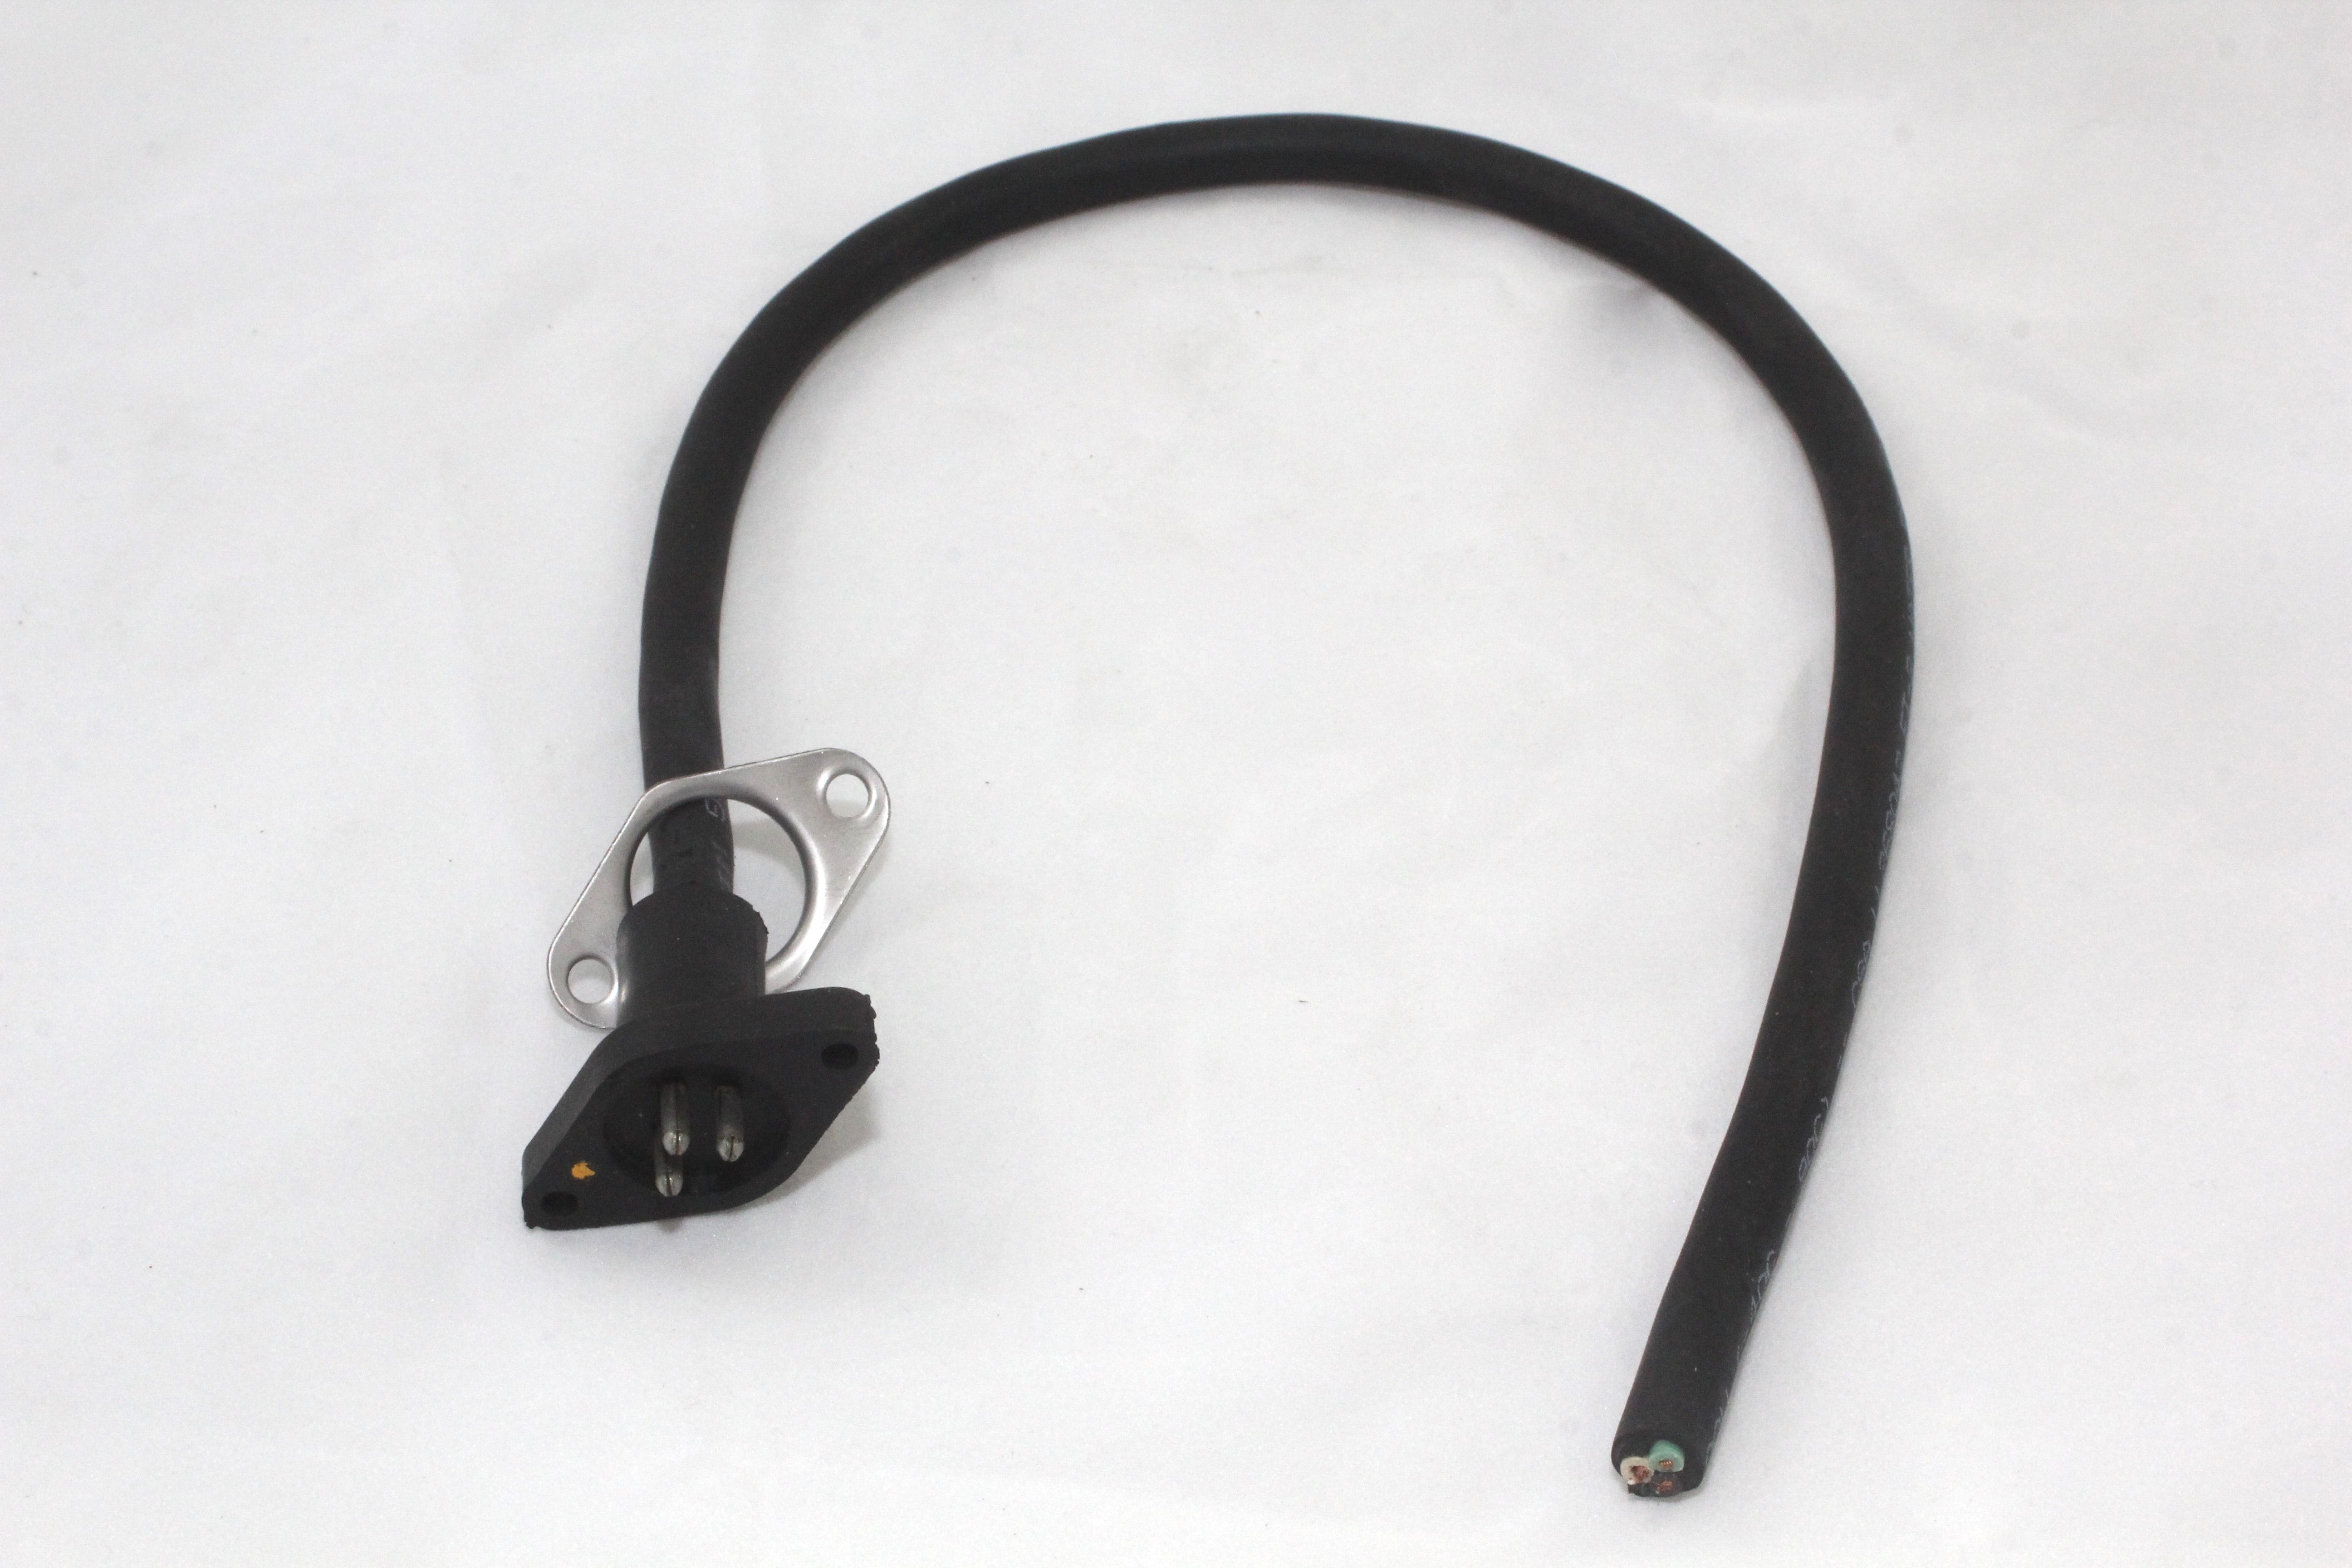 Male plug with 18" wire